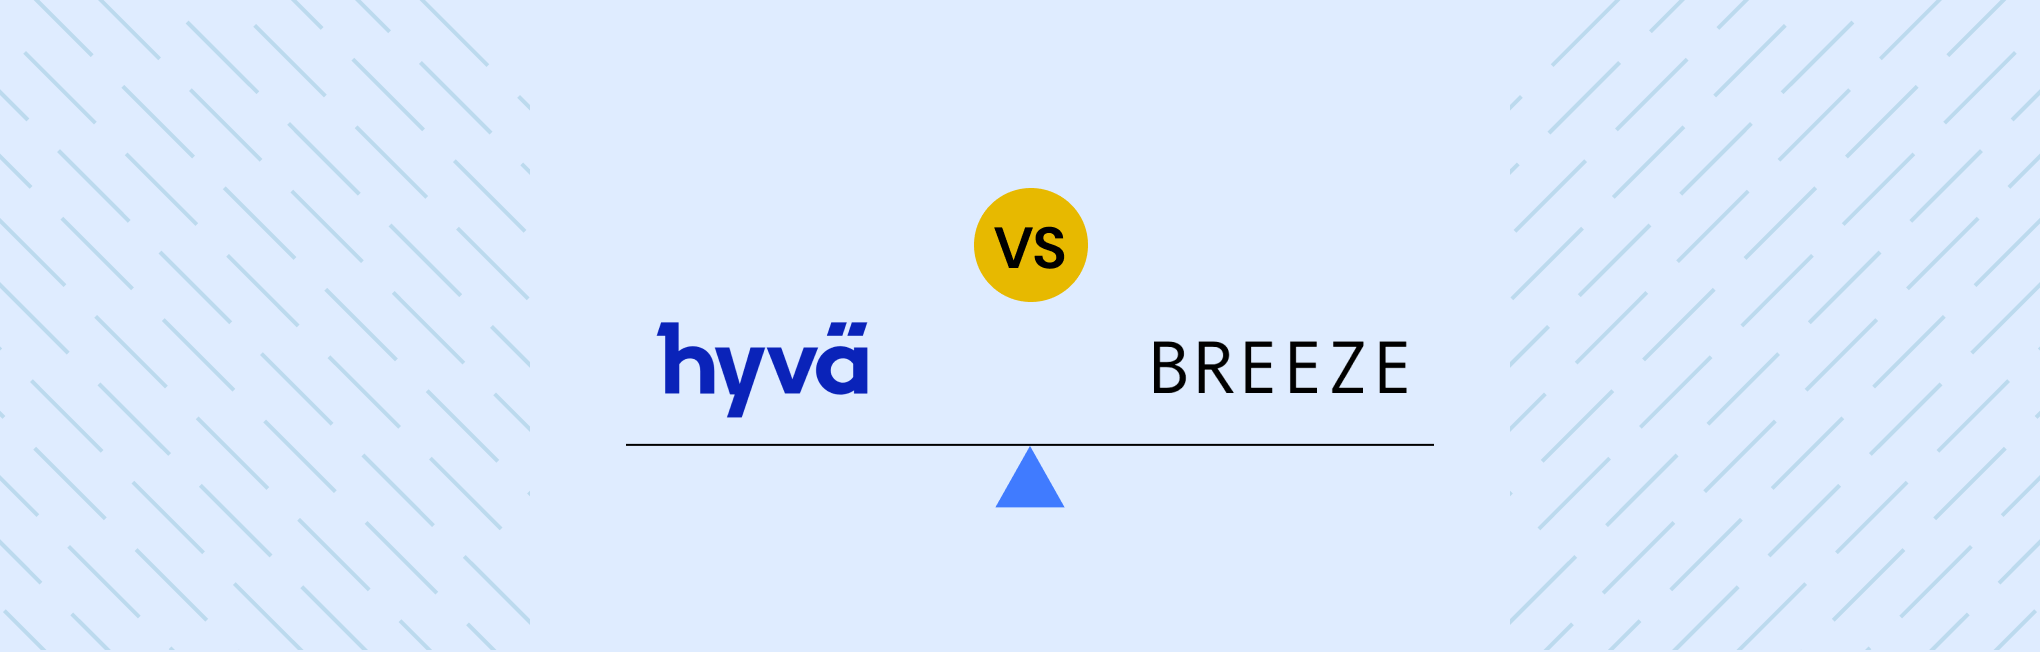 Hyva Vs. Breeze for Magento — Which Frontend is Better?